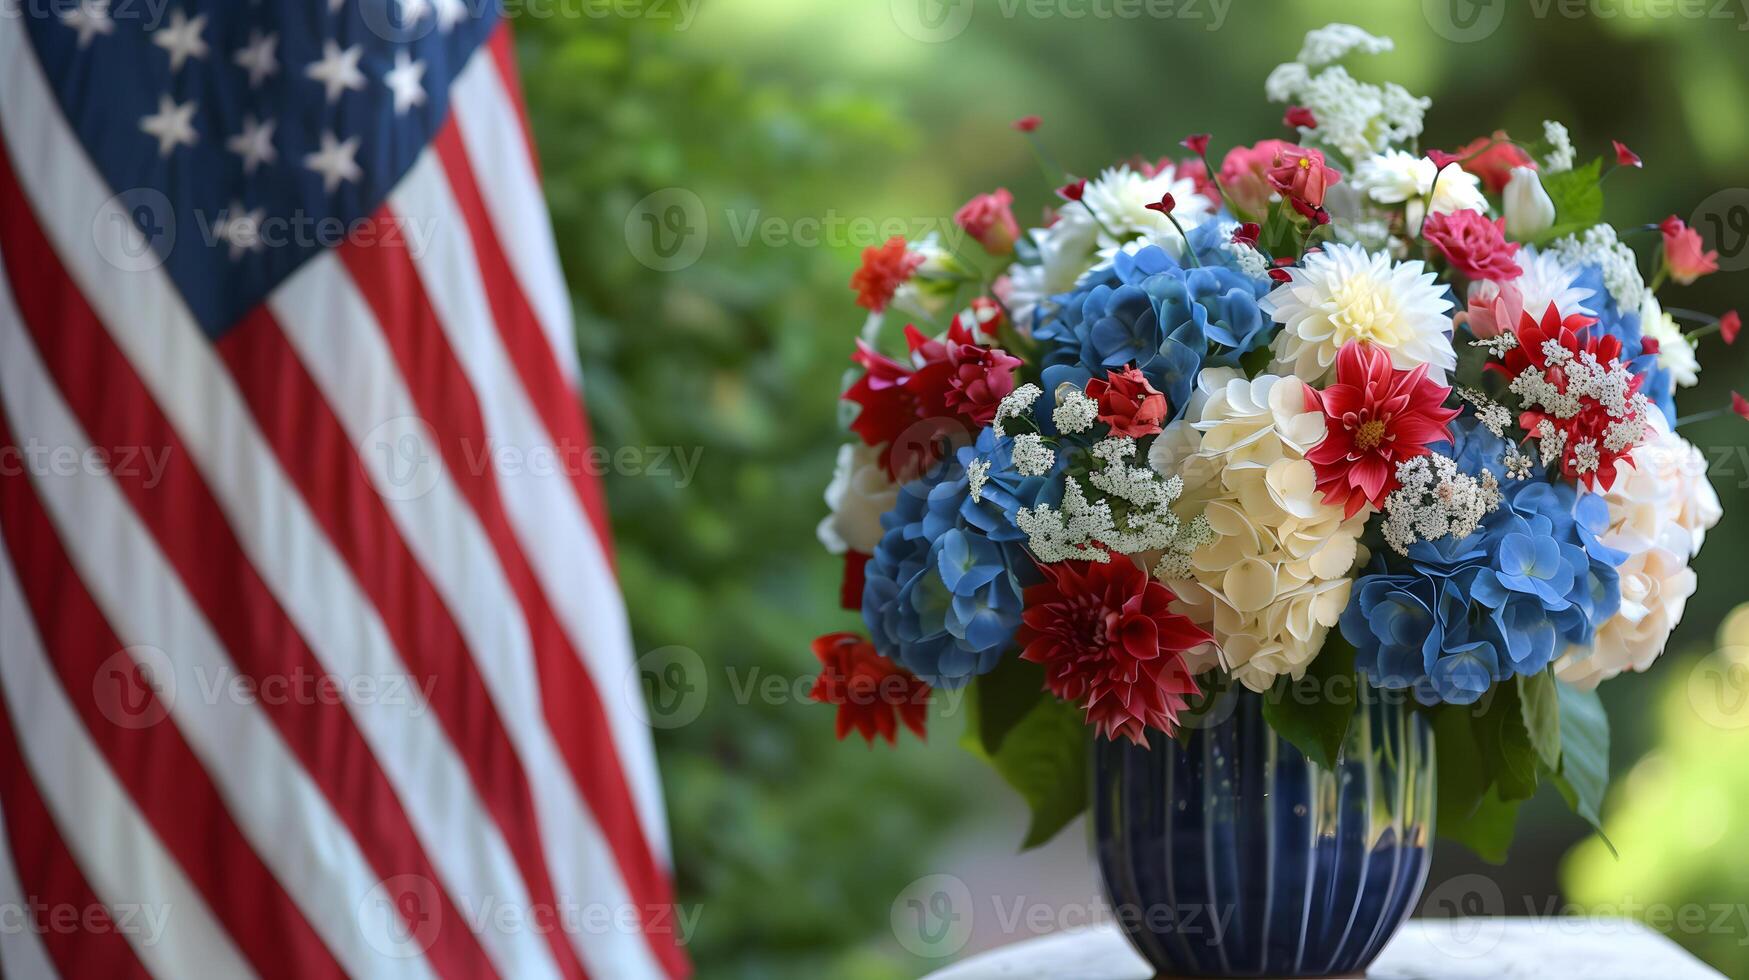 Independence Day, the Fourth of July Patriotic background with American flag and Beautiful Hydrangea flower bouquet in red blue white photo